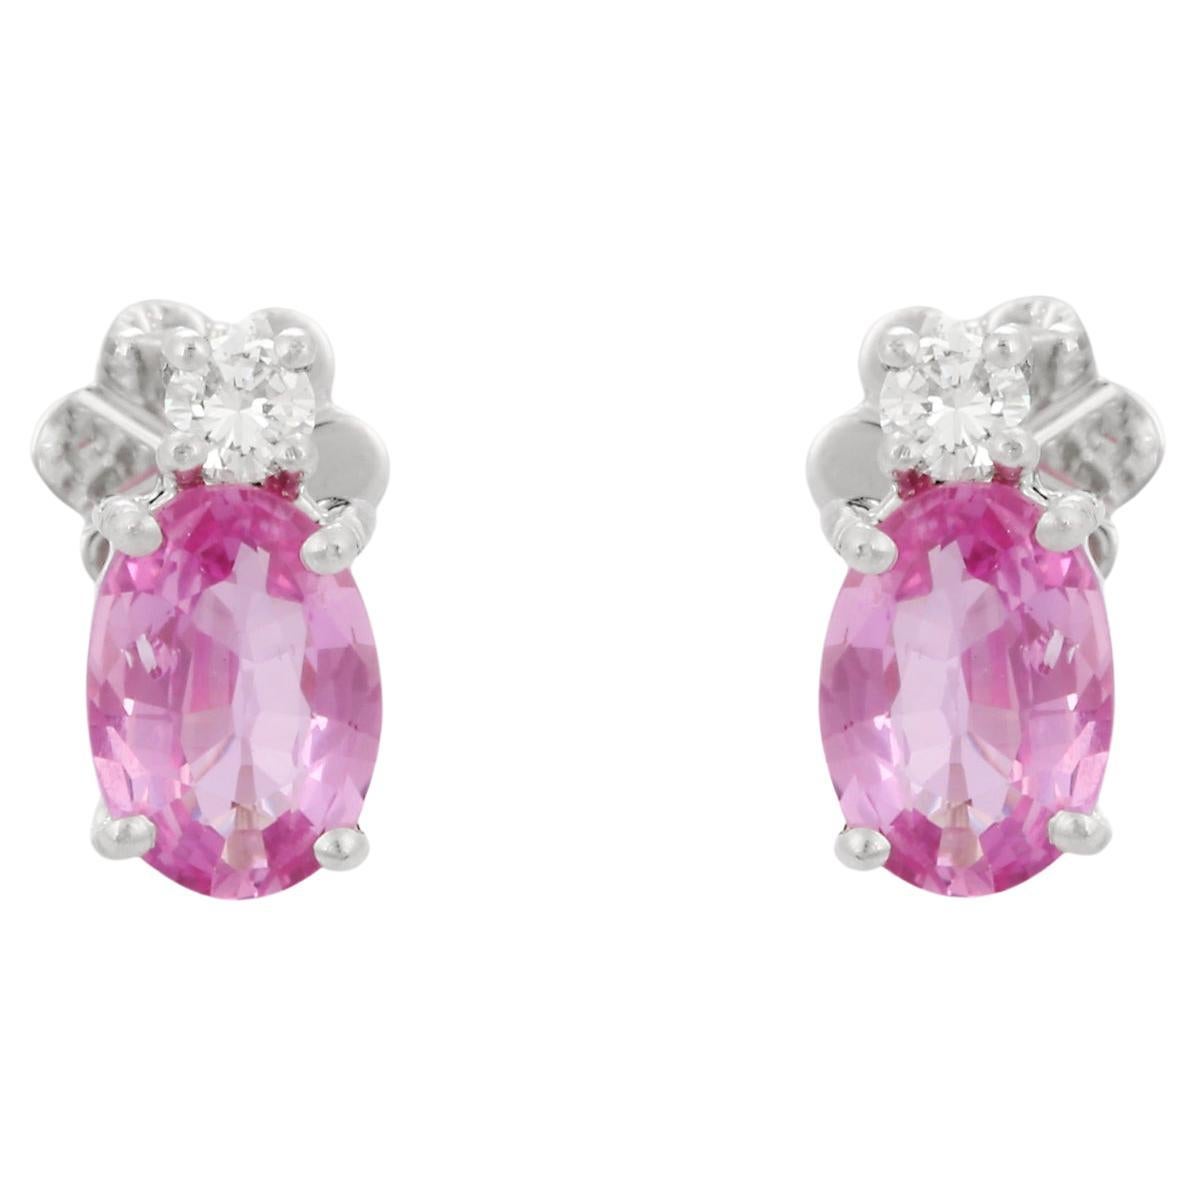 1.48 Carat Prong Set Pink Sapphire Diamond Stud Earrings in 18K Solid White Gold For Sale